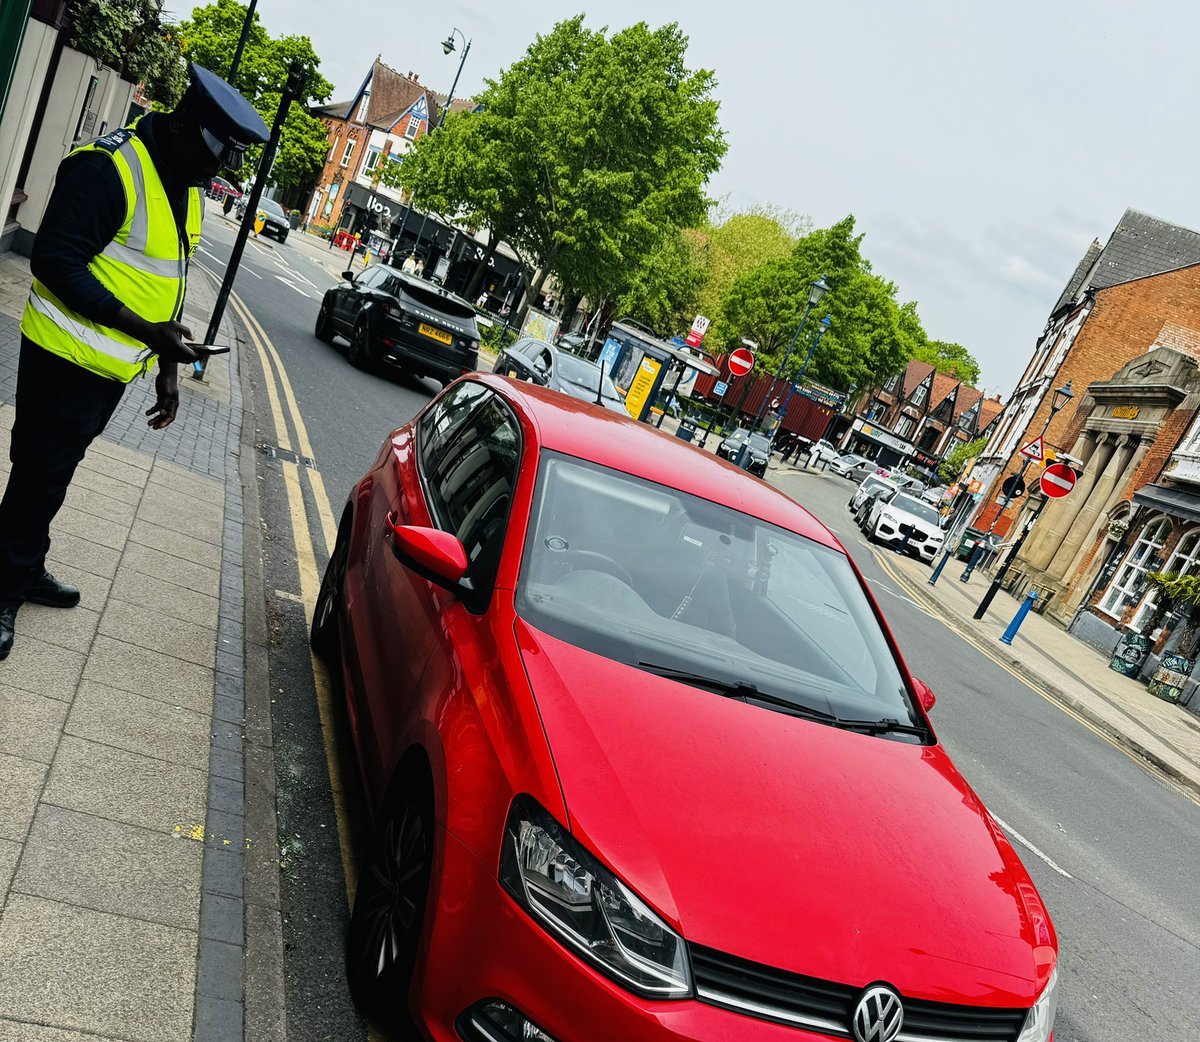 More parking patrols conducted around Moseley and Kings Heath today☀️ thank you to @BhamCityCouncil for your help and support with issuing a number of tickets in the area⛔️ #dontplonkit @NKirkpatrickWMP